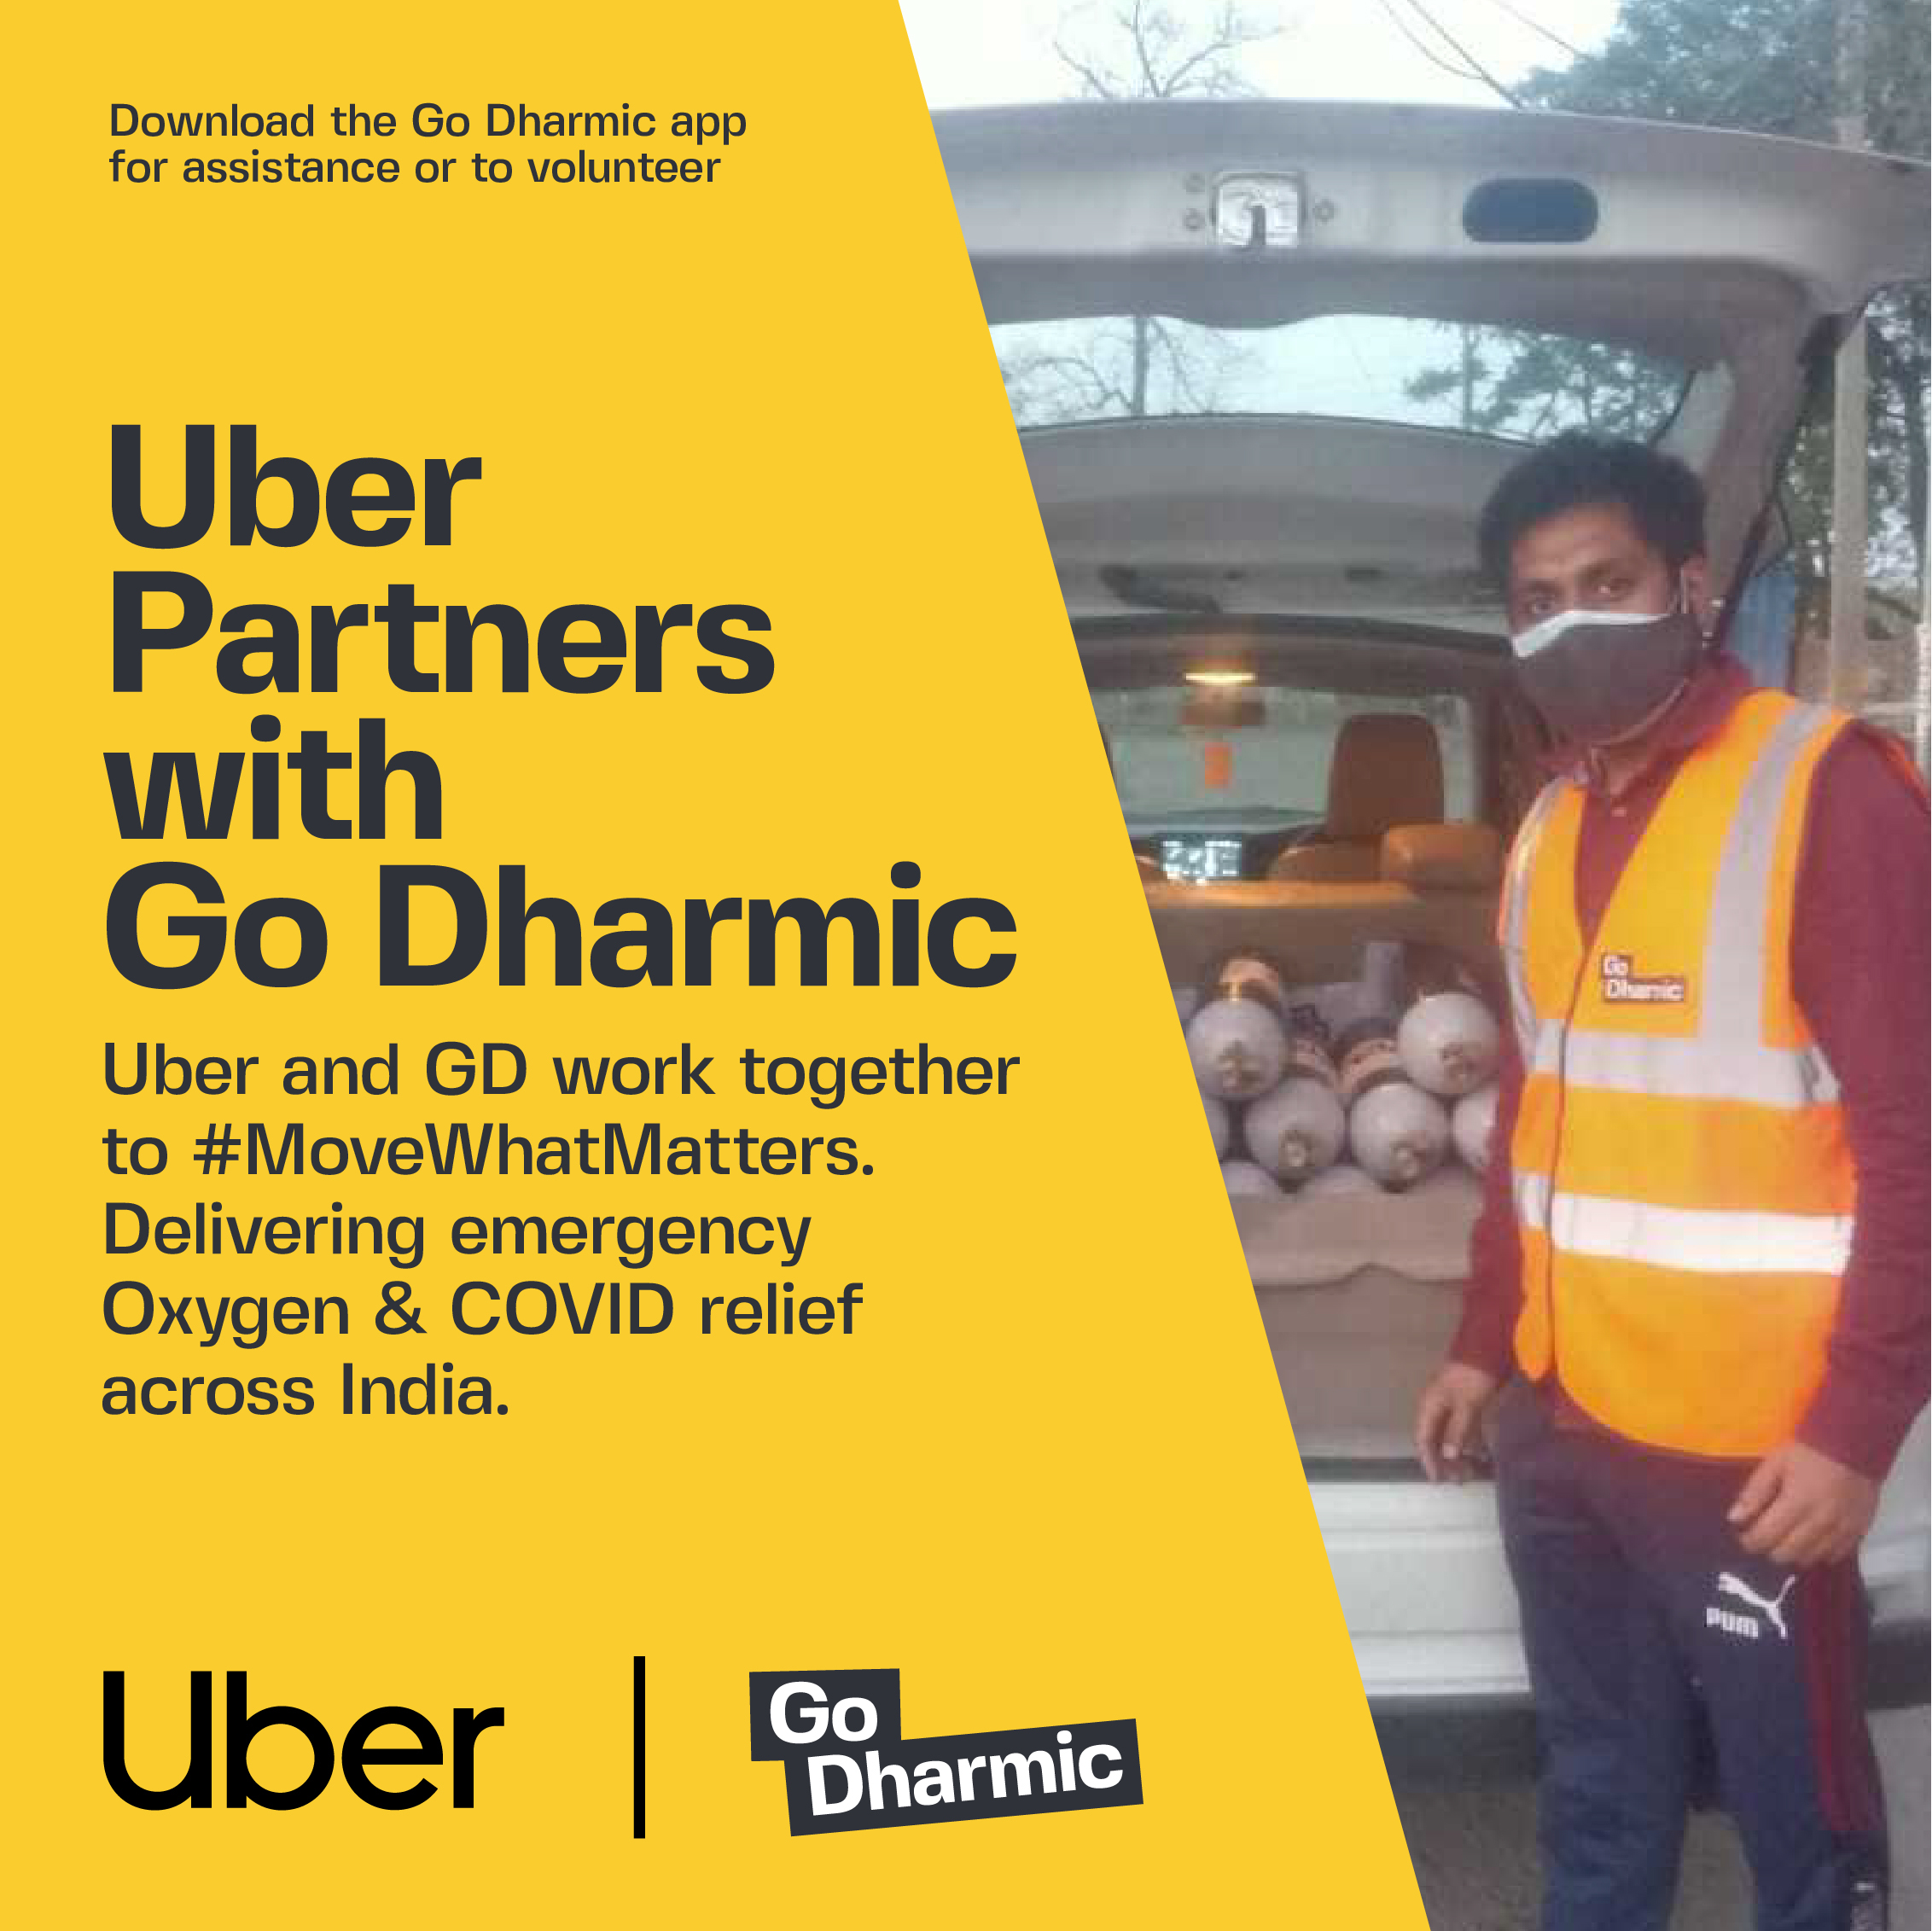 Uber Partners With Go Dharmic to #Movewhatmatters Providing Oxygen Relief Across India in Covid Crisis